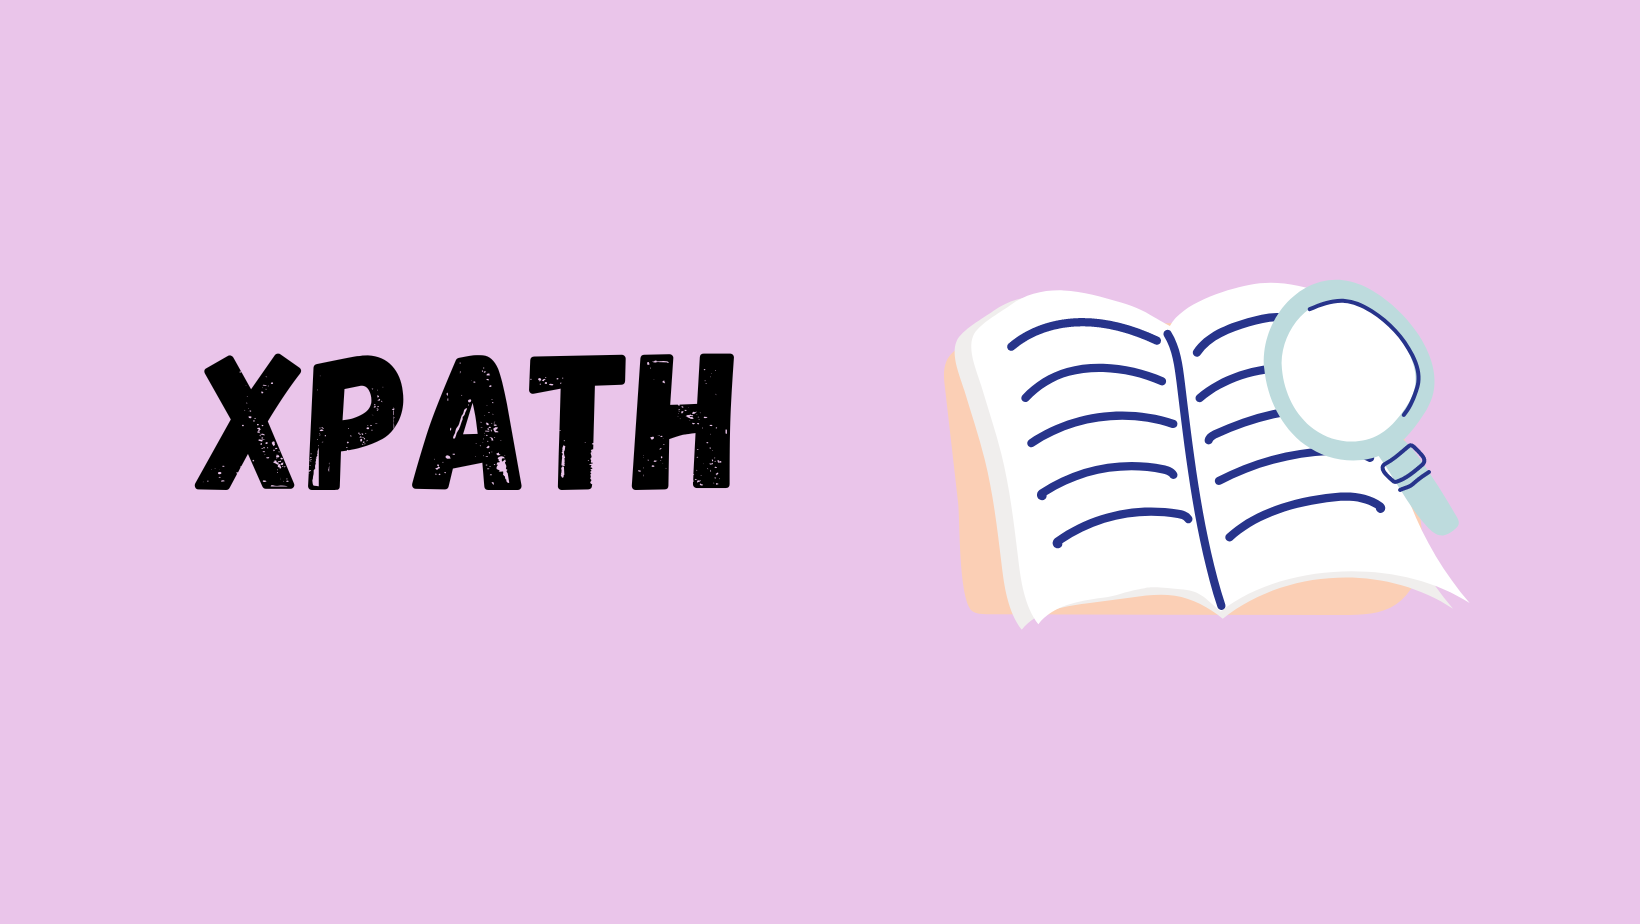 how to select elements by text in xpath